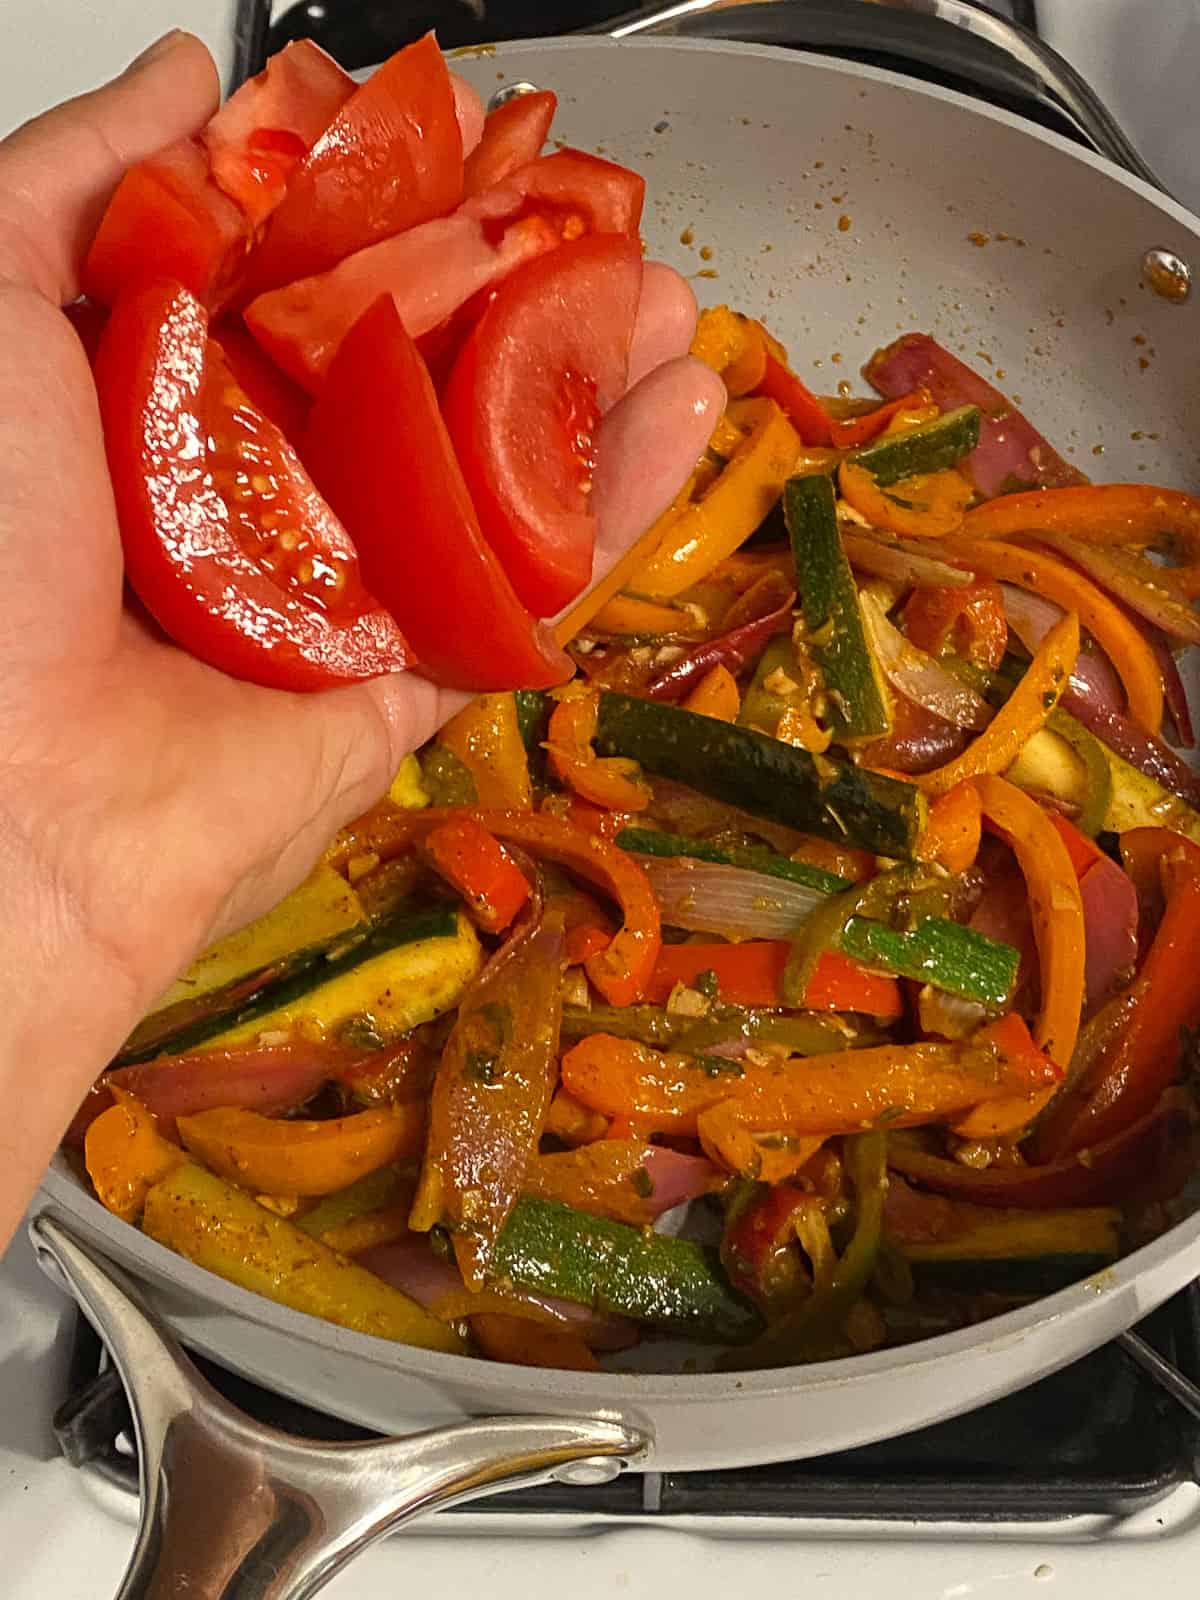 process shot of adding red bell pepper to pan of veggies